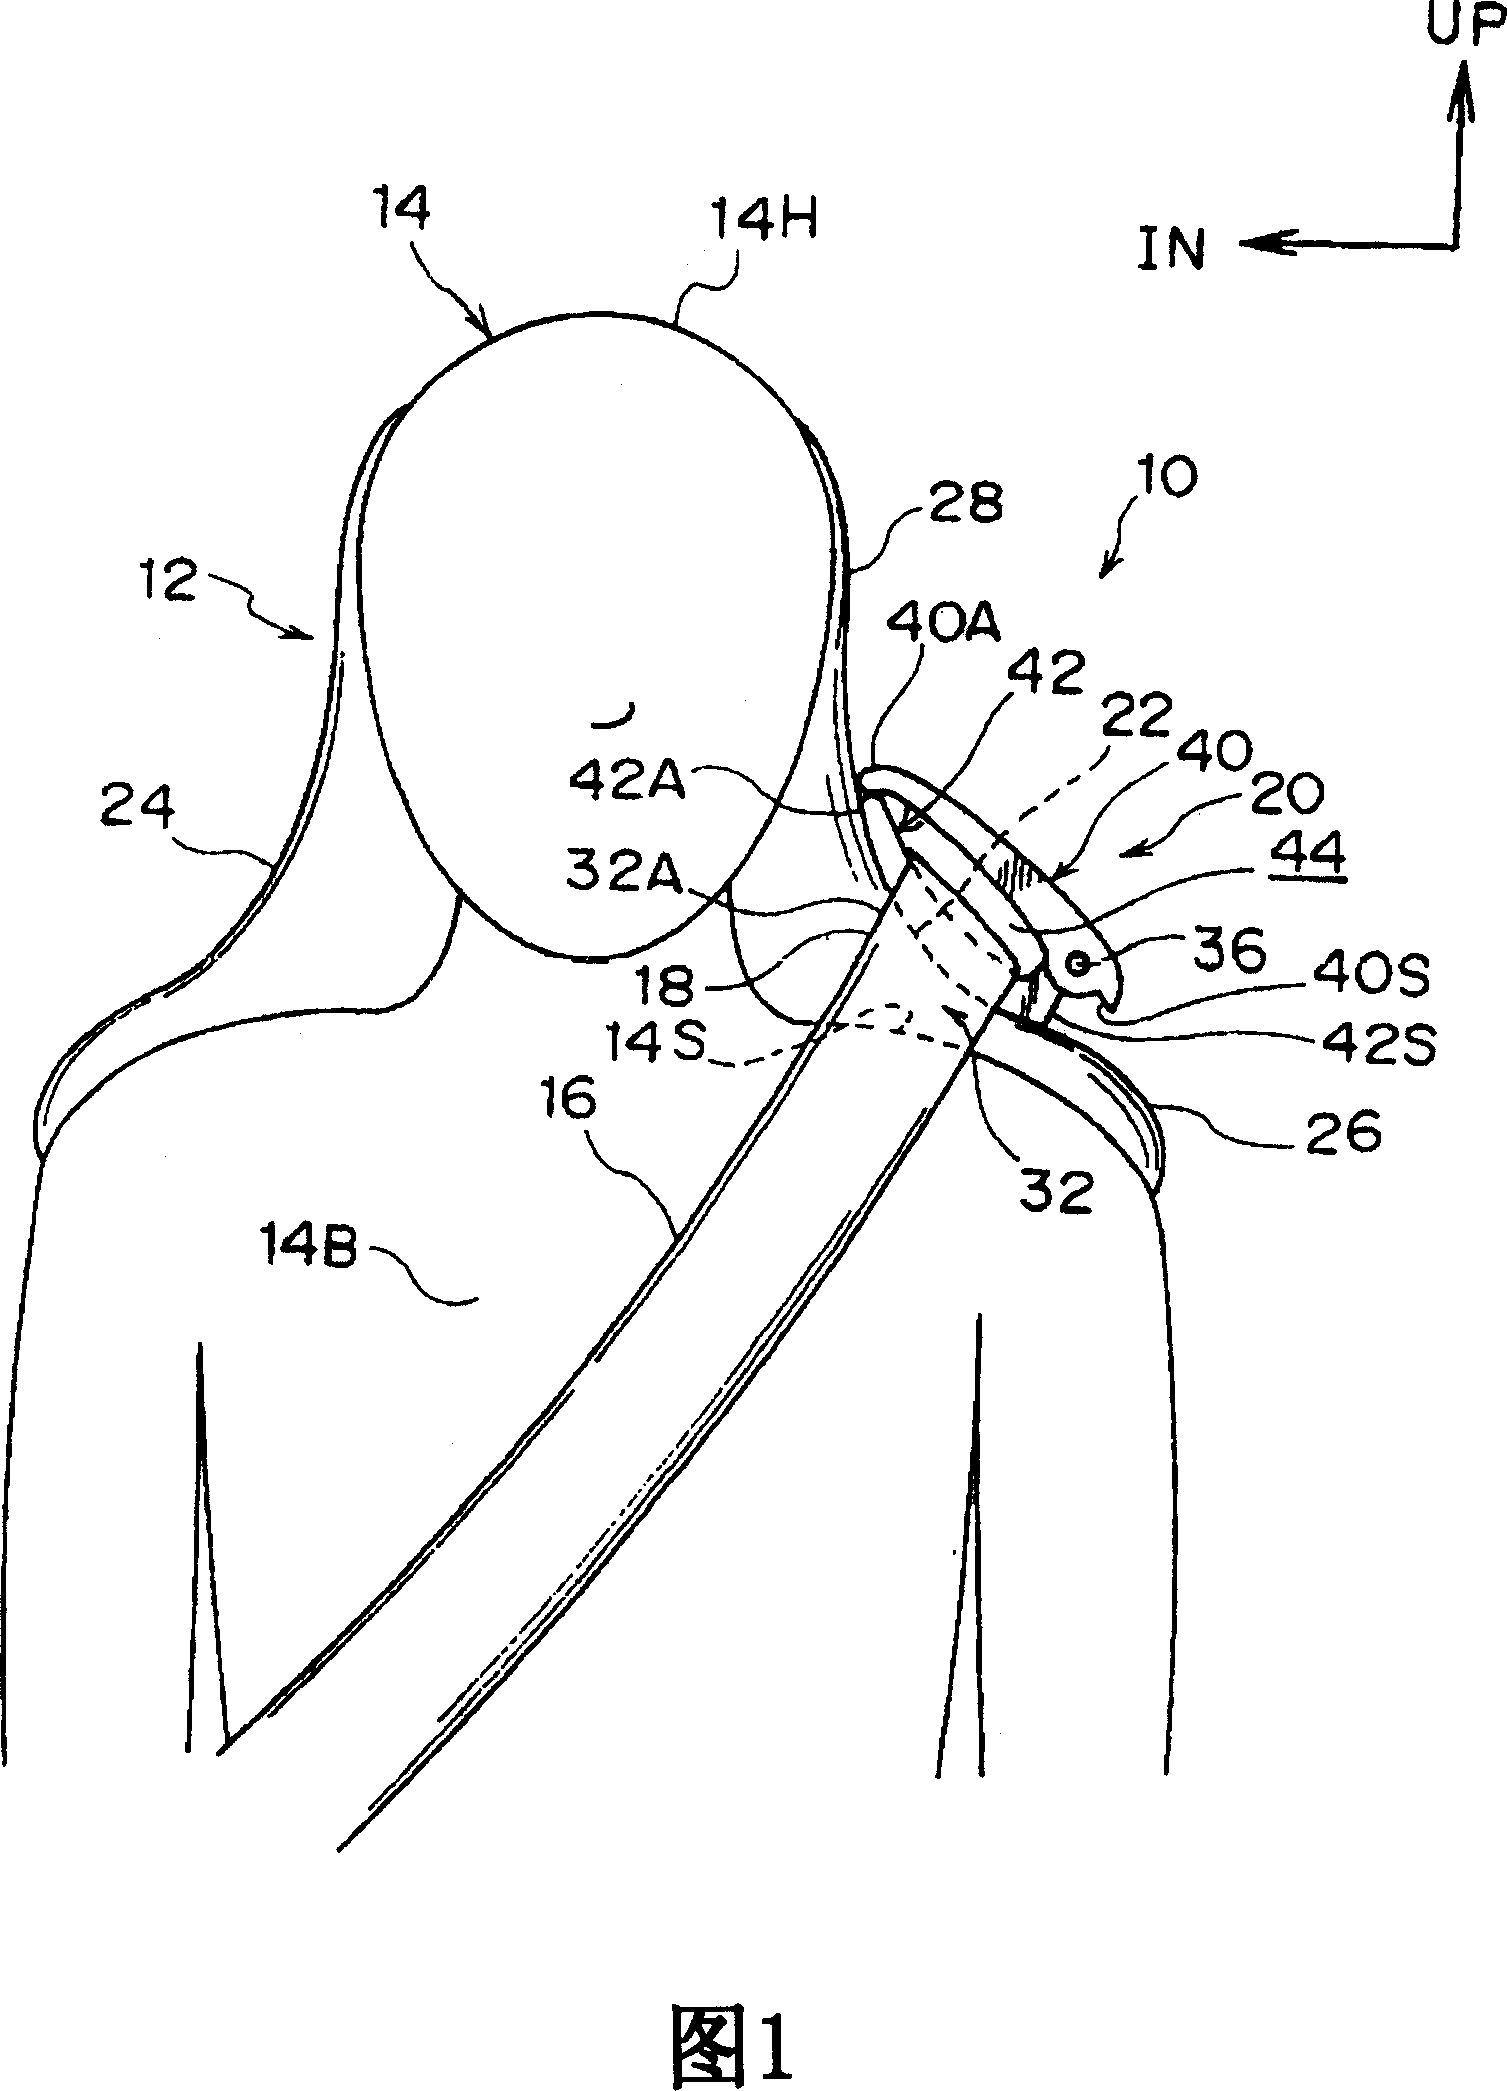 Air safety belt apparatus for vehicle